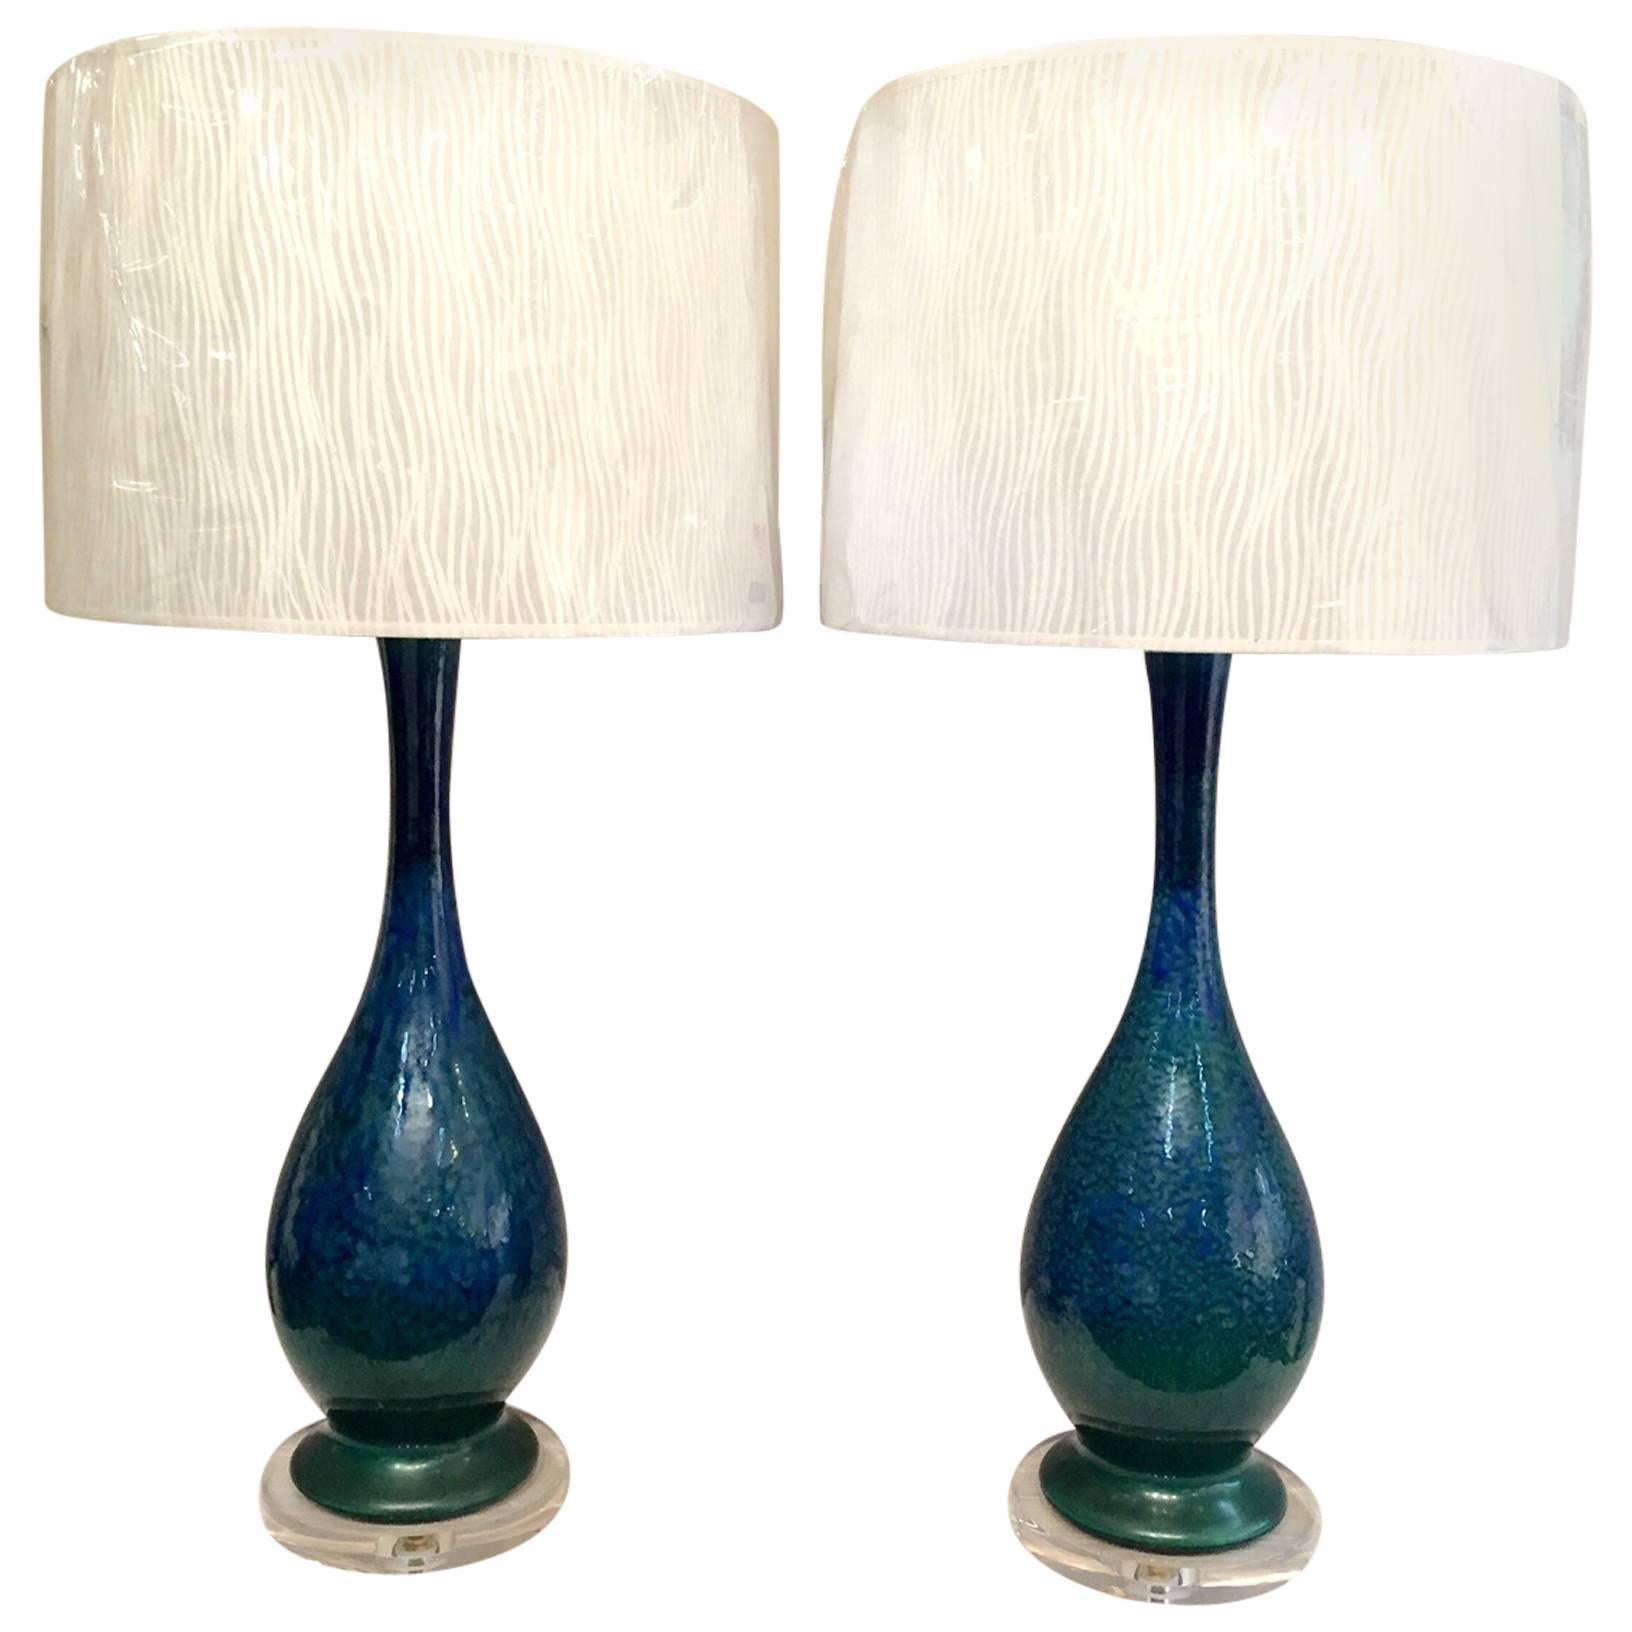 Pair of Mid-Century Lamps with Lucite Bases